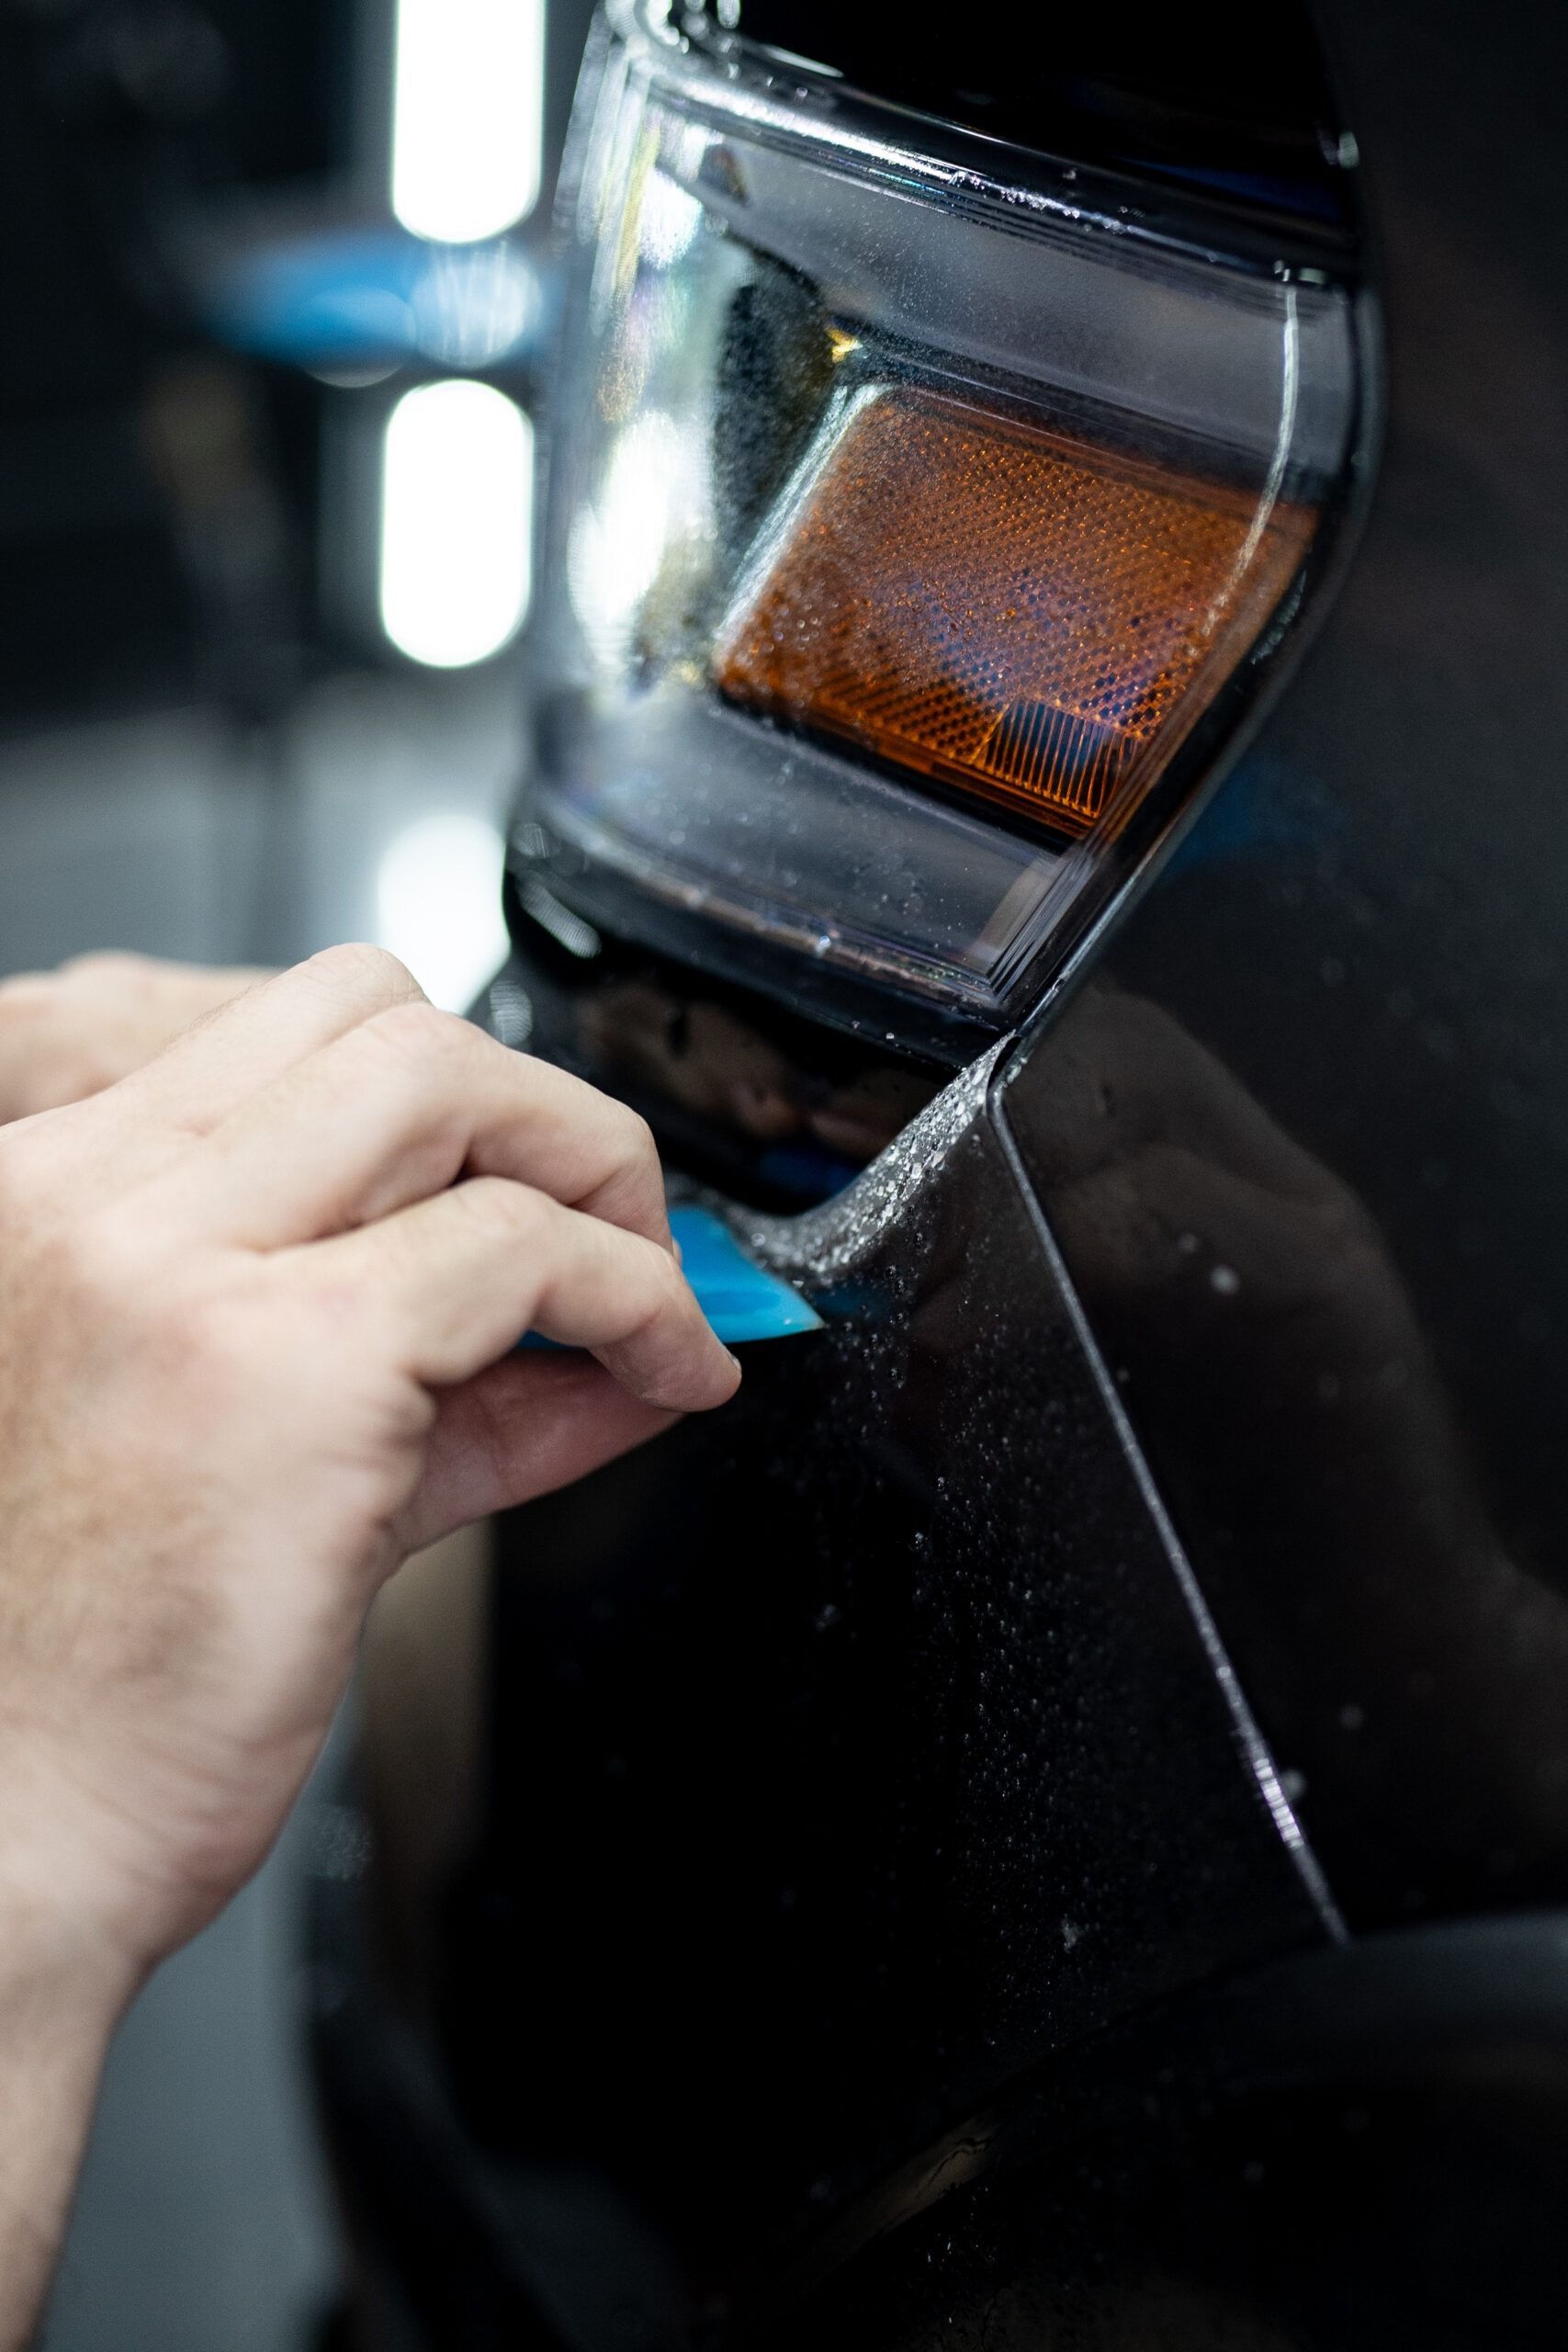 A person is applying a protective film to a car headlight.